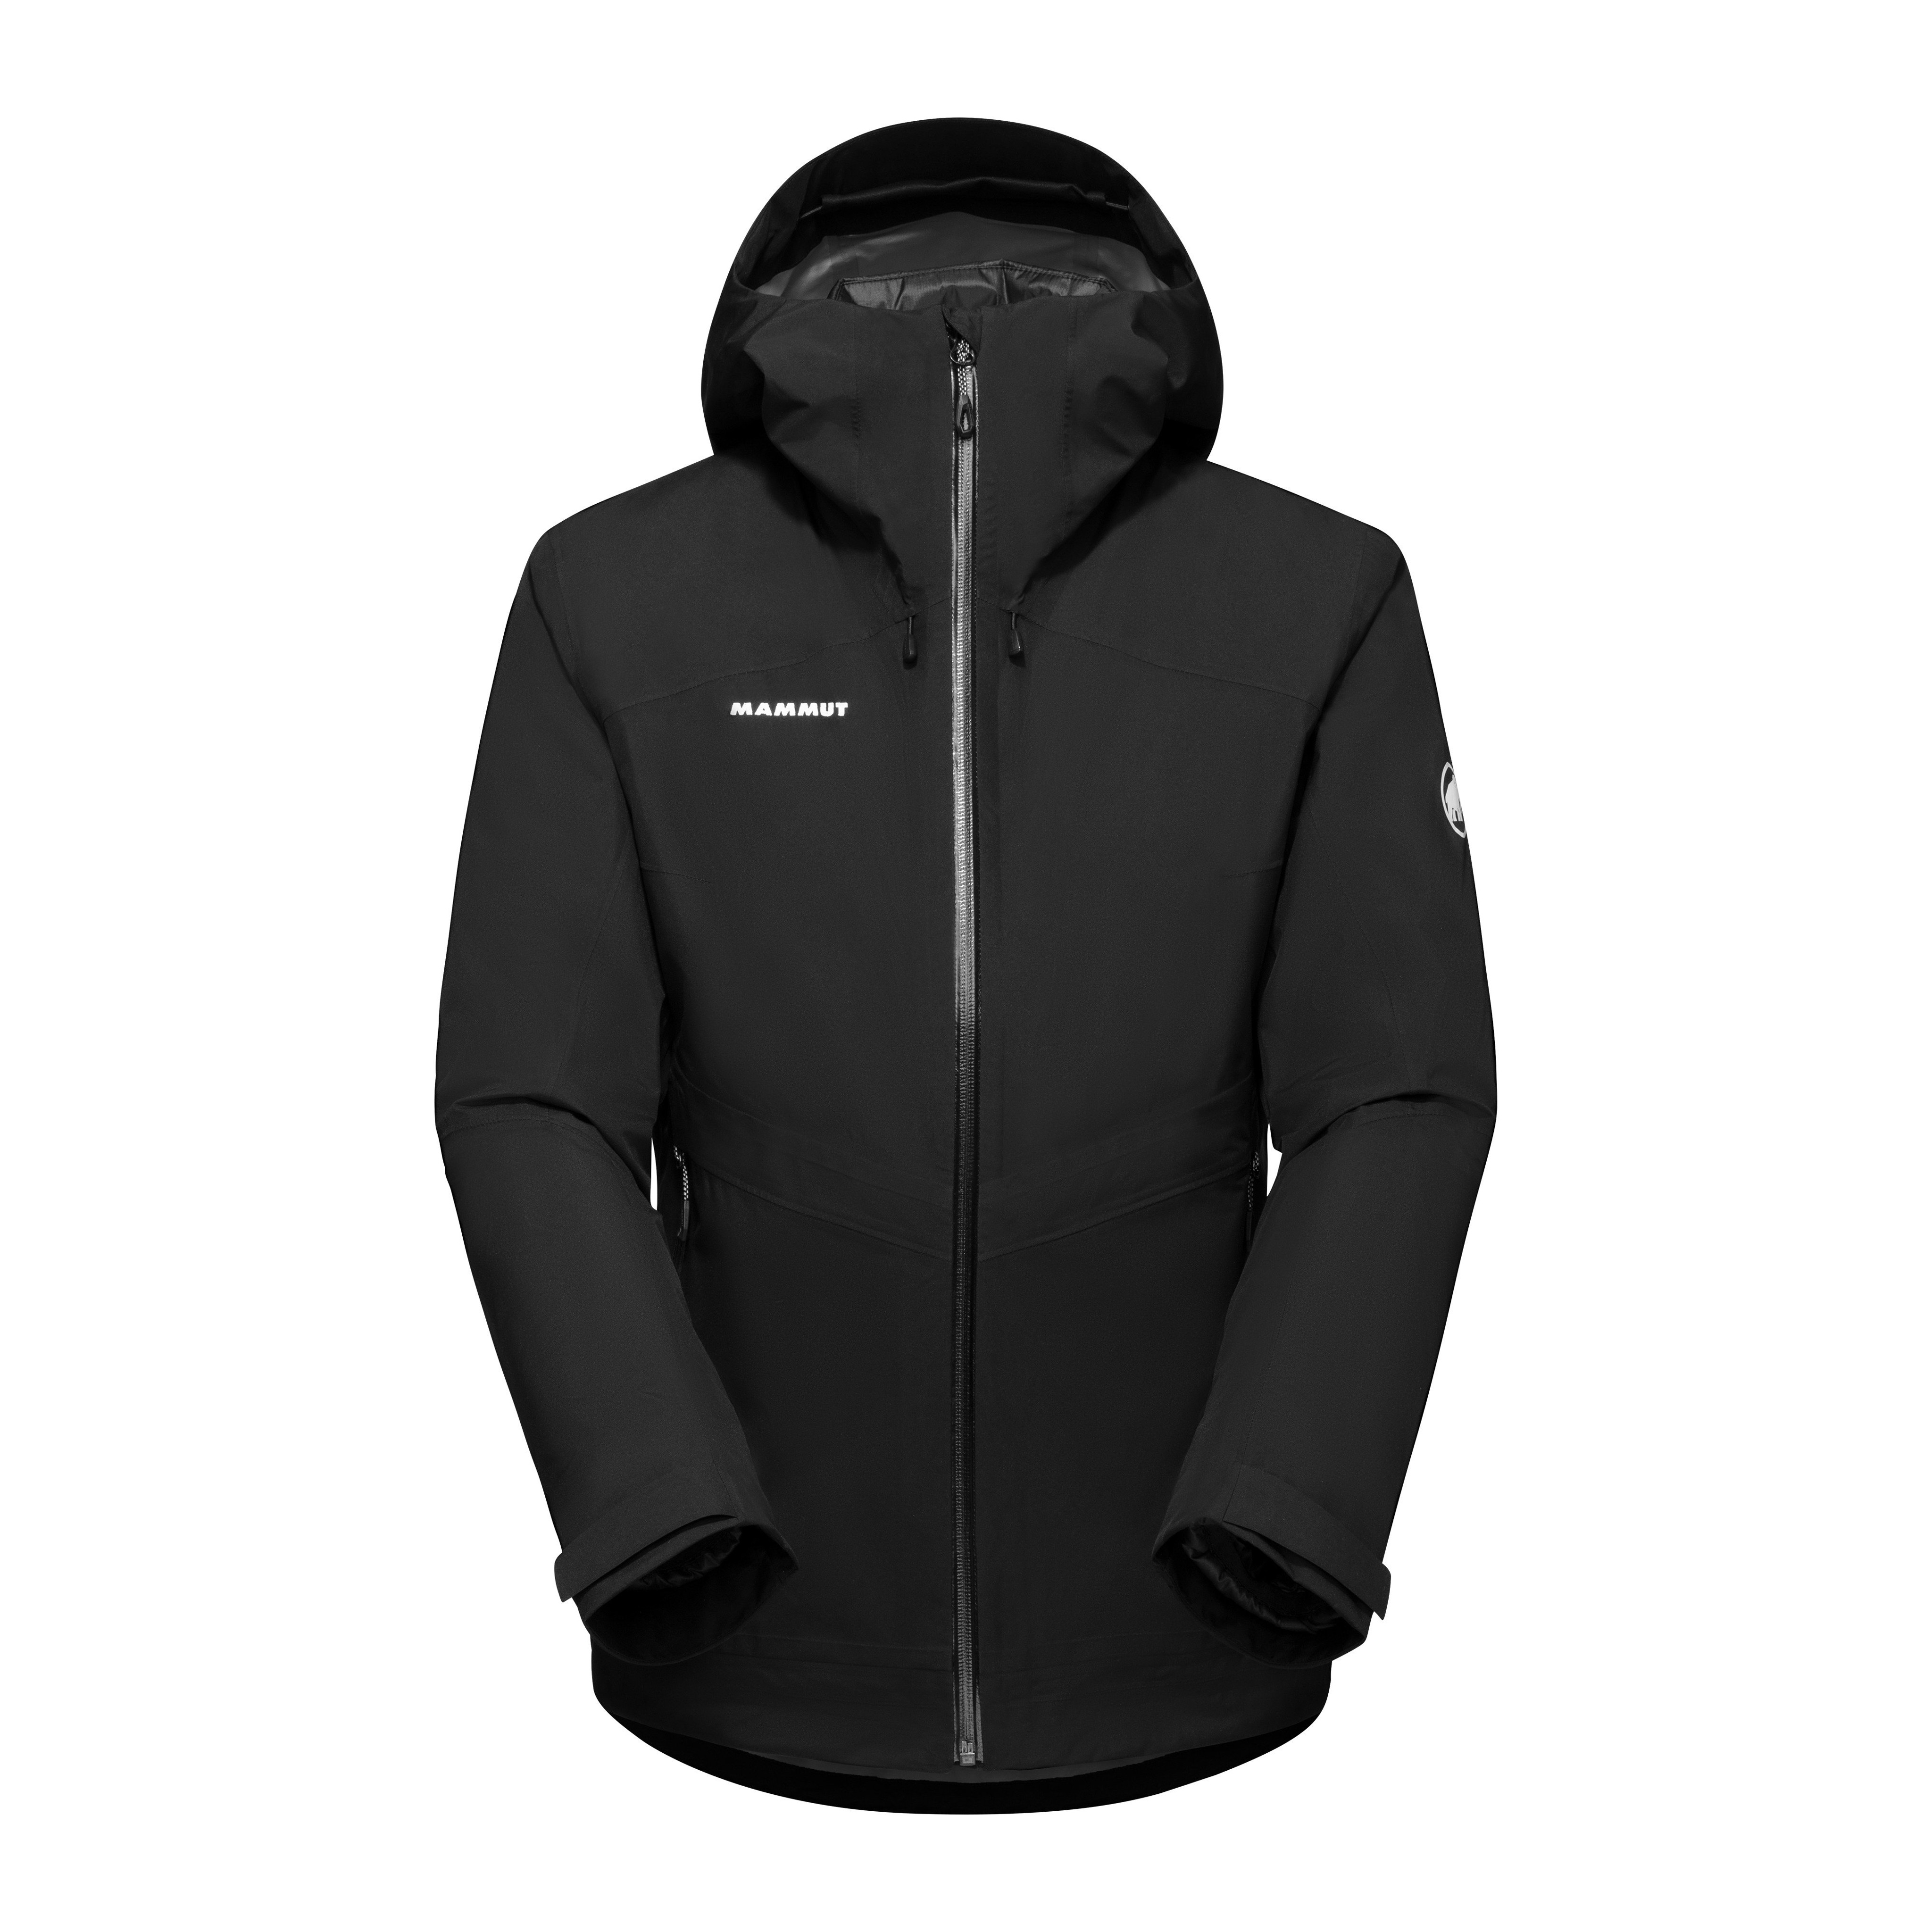 Convey 3 in 1 HS Hooded Jacket Women - black-black, XS product image